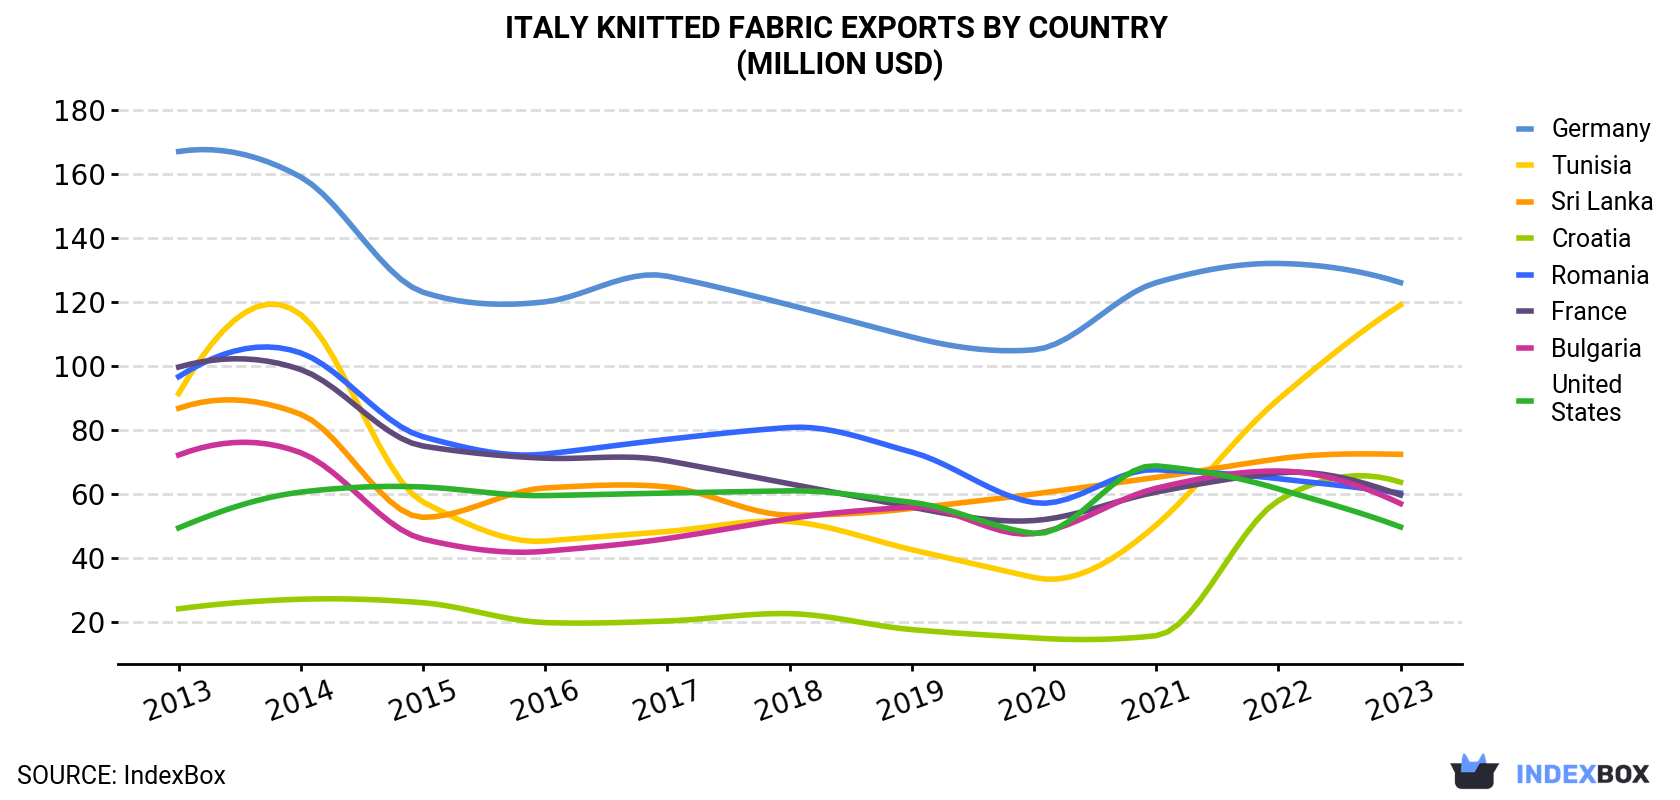 Italy Knitted Fabric Exports By Country (Million USD)